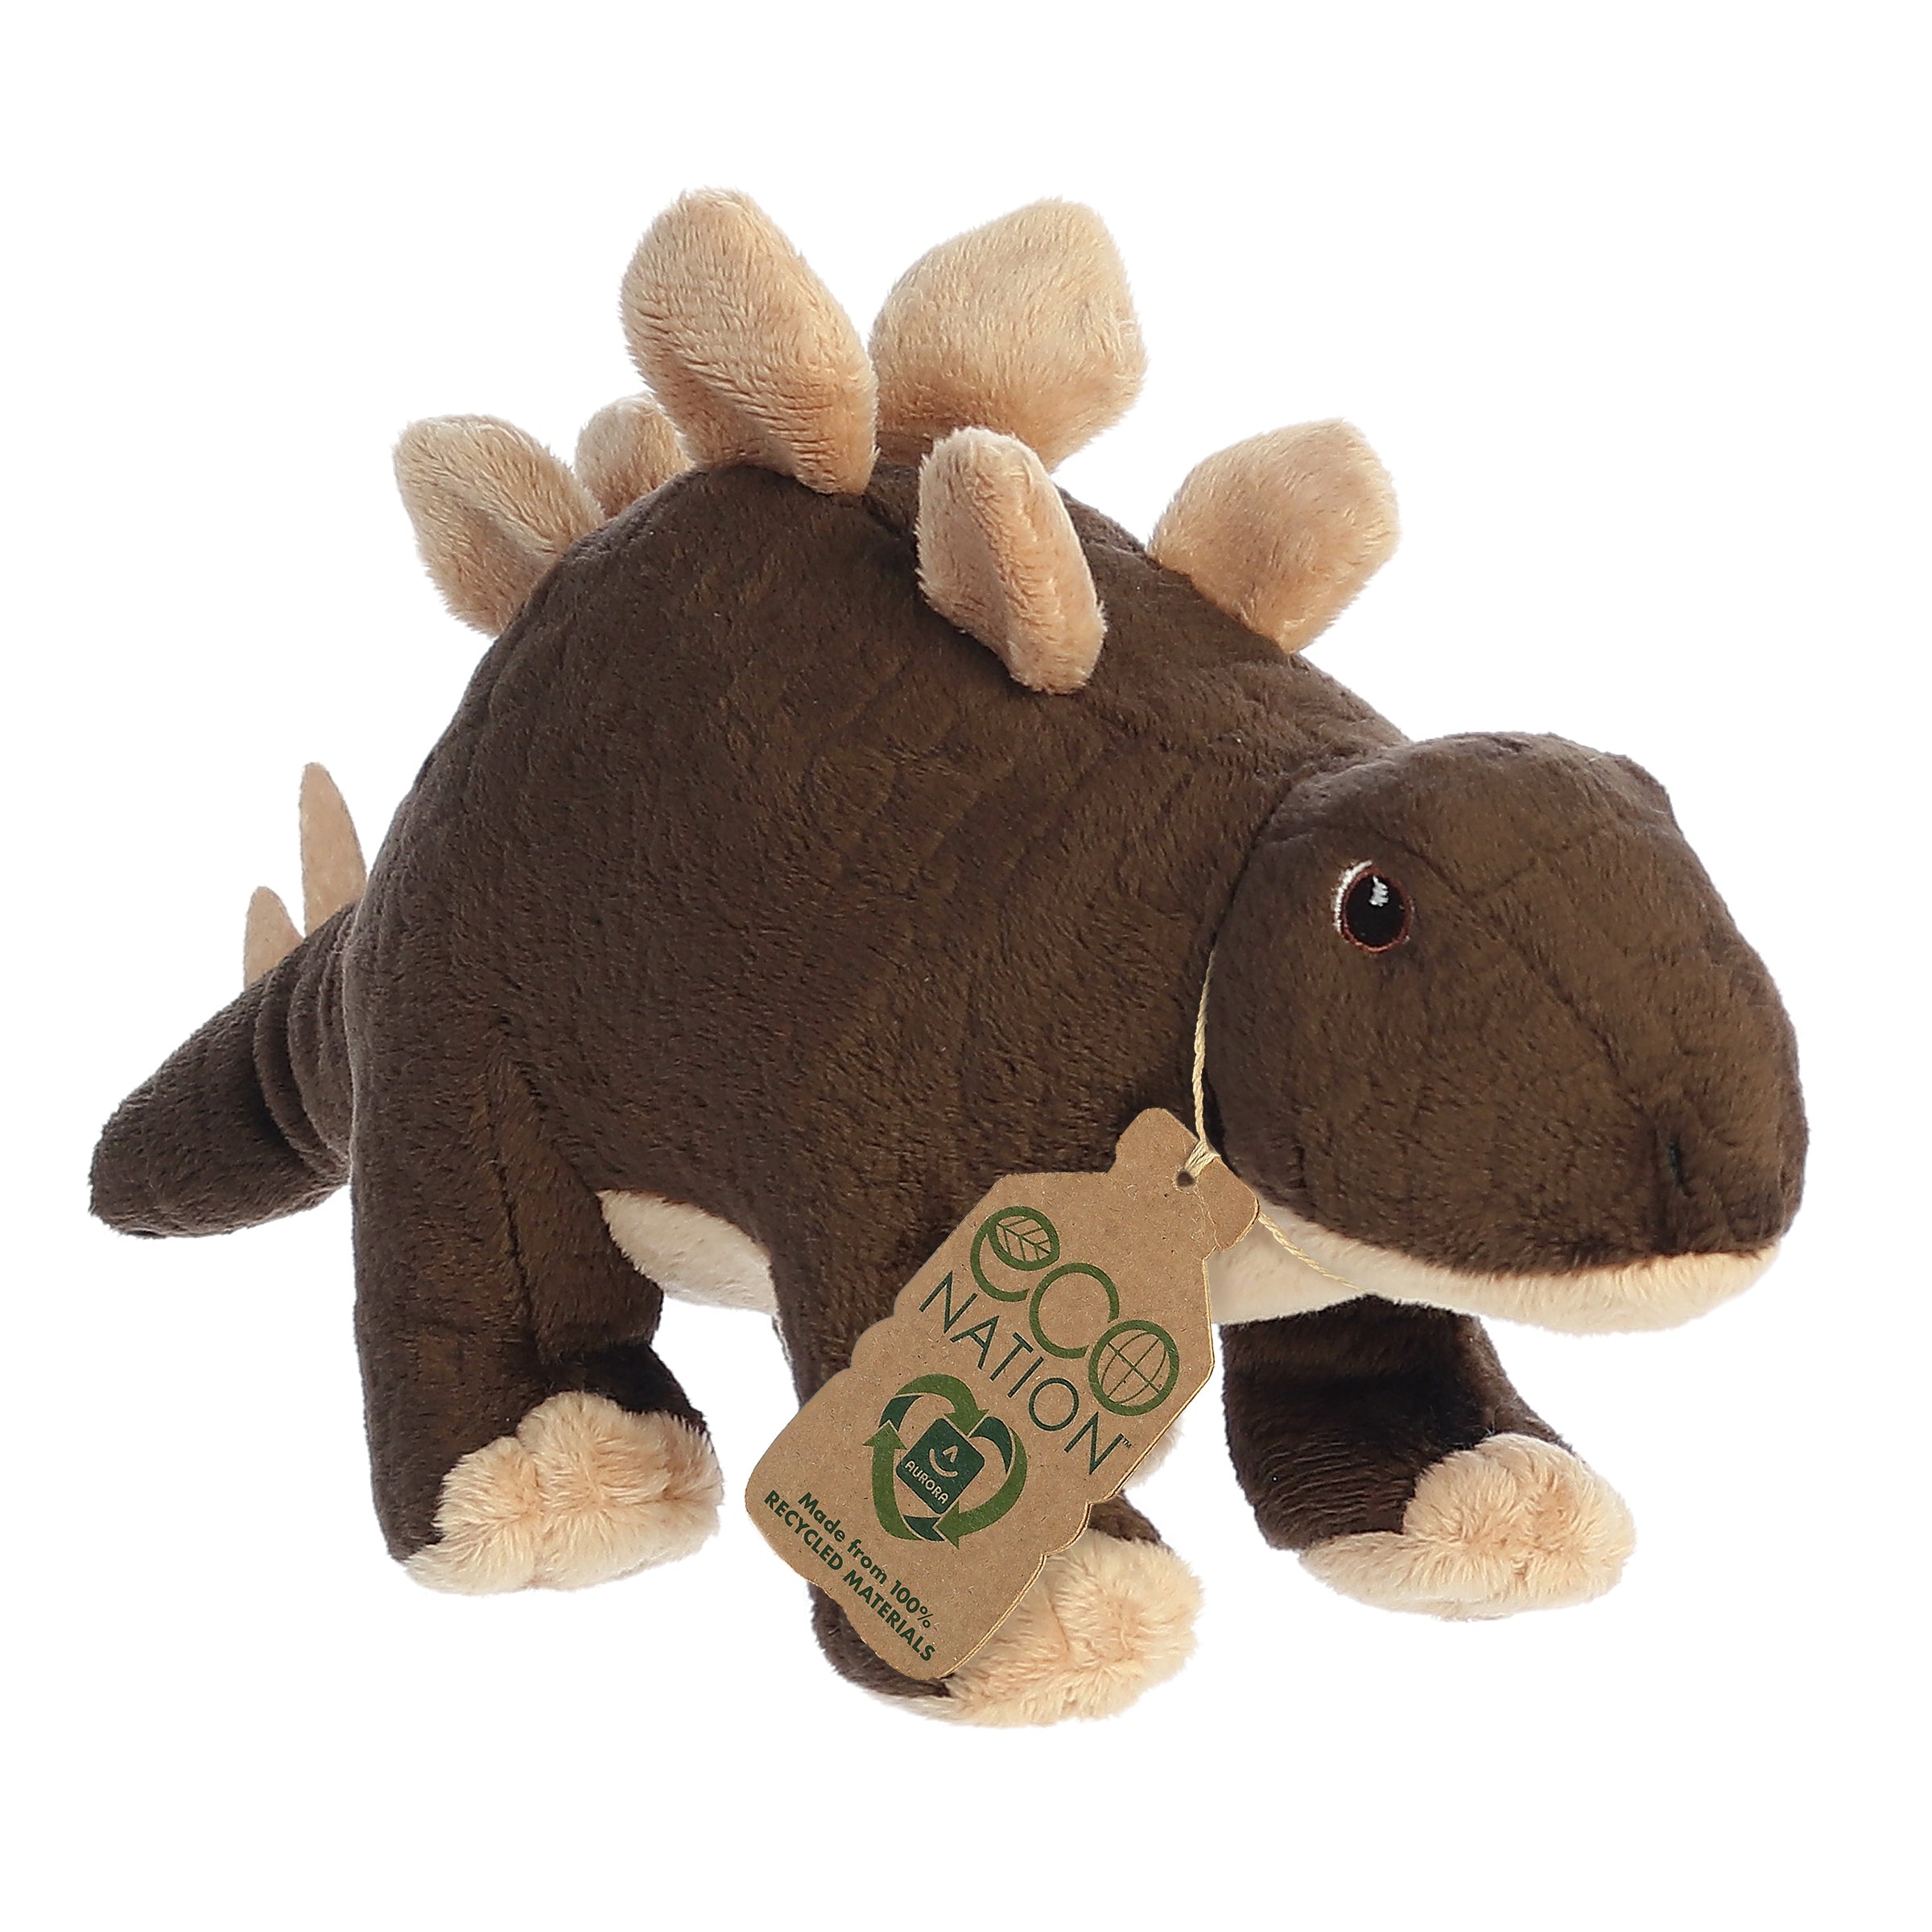 A captivating dino stegosaurus plush with soft plush spikes on its back, embroidered eyes, and an eco-nation tag